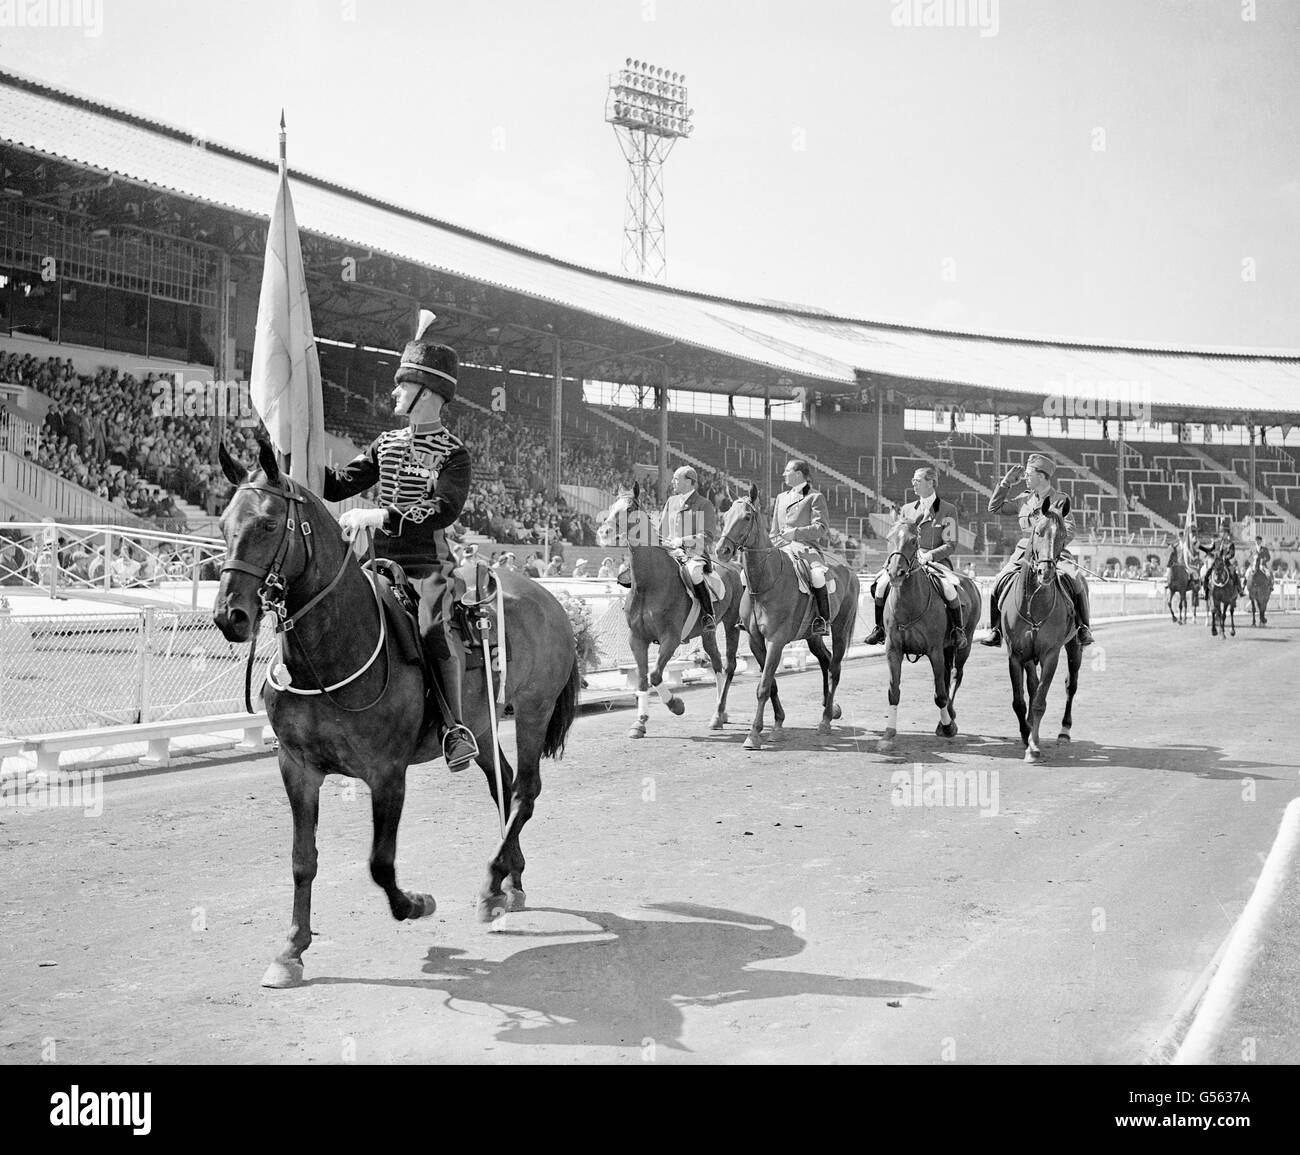 The Swedish team trots in front of spectators at the International Horse Show Stock Photo